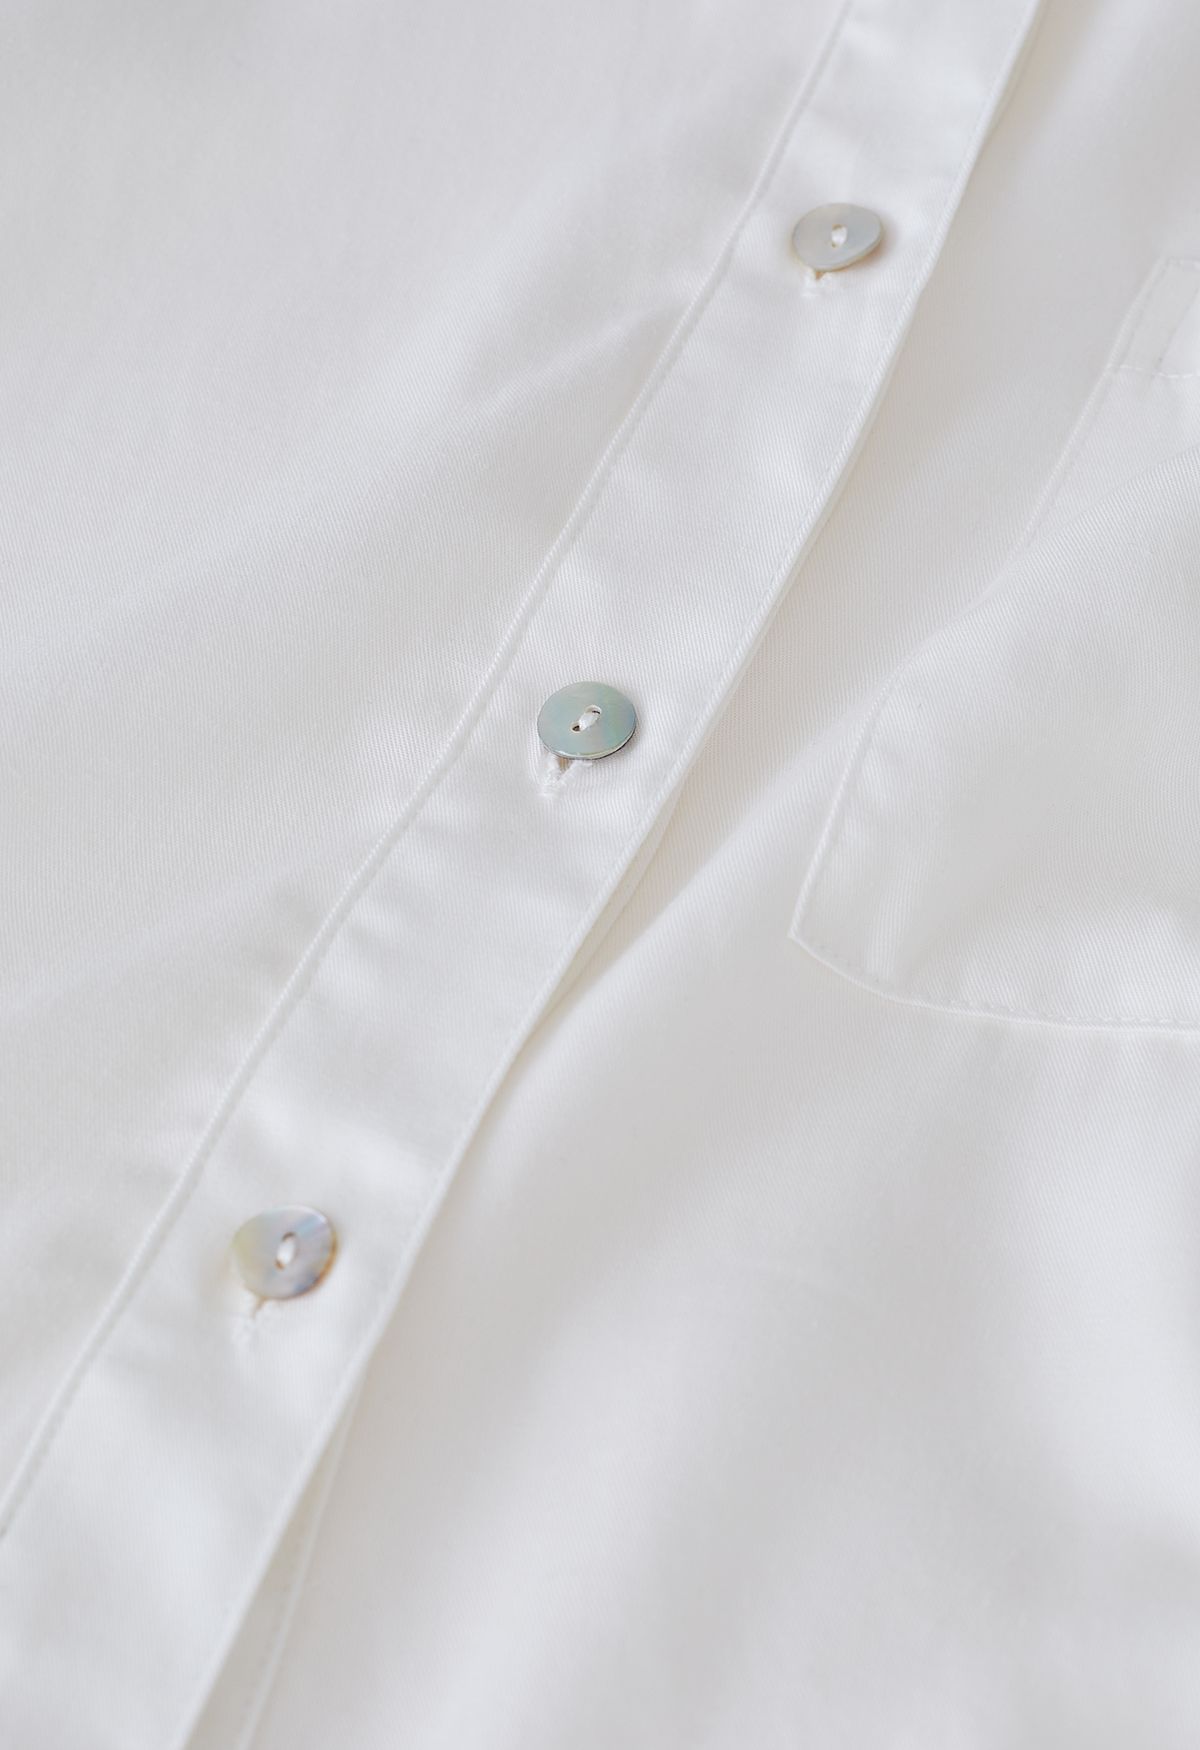 Pocket Short Sleeve Button Up Shirt in Ivory